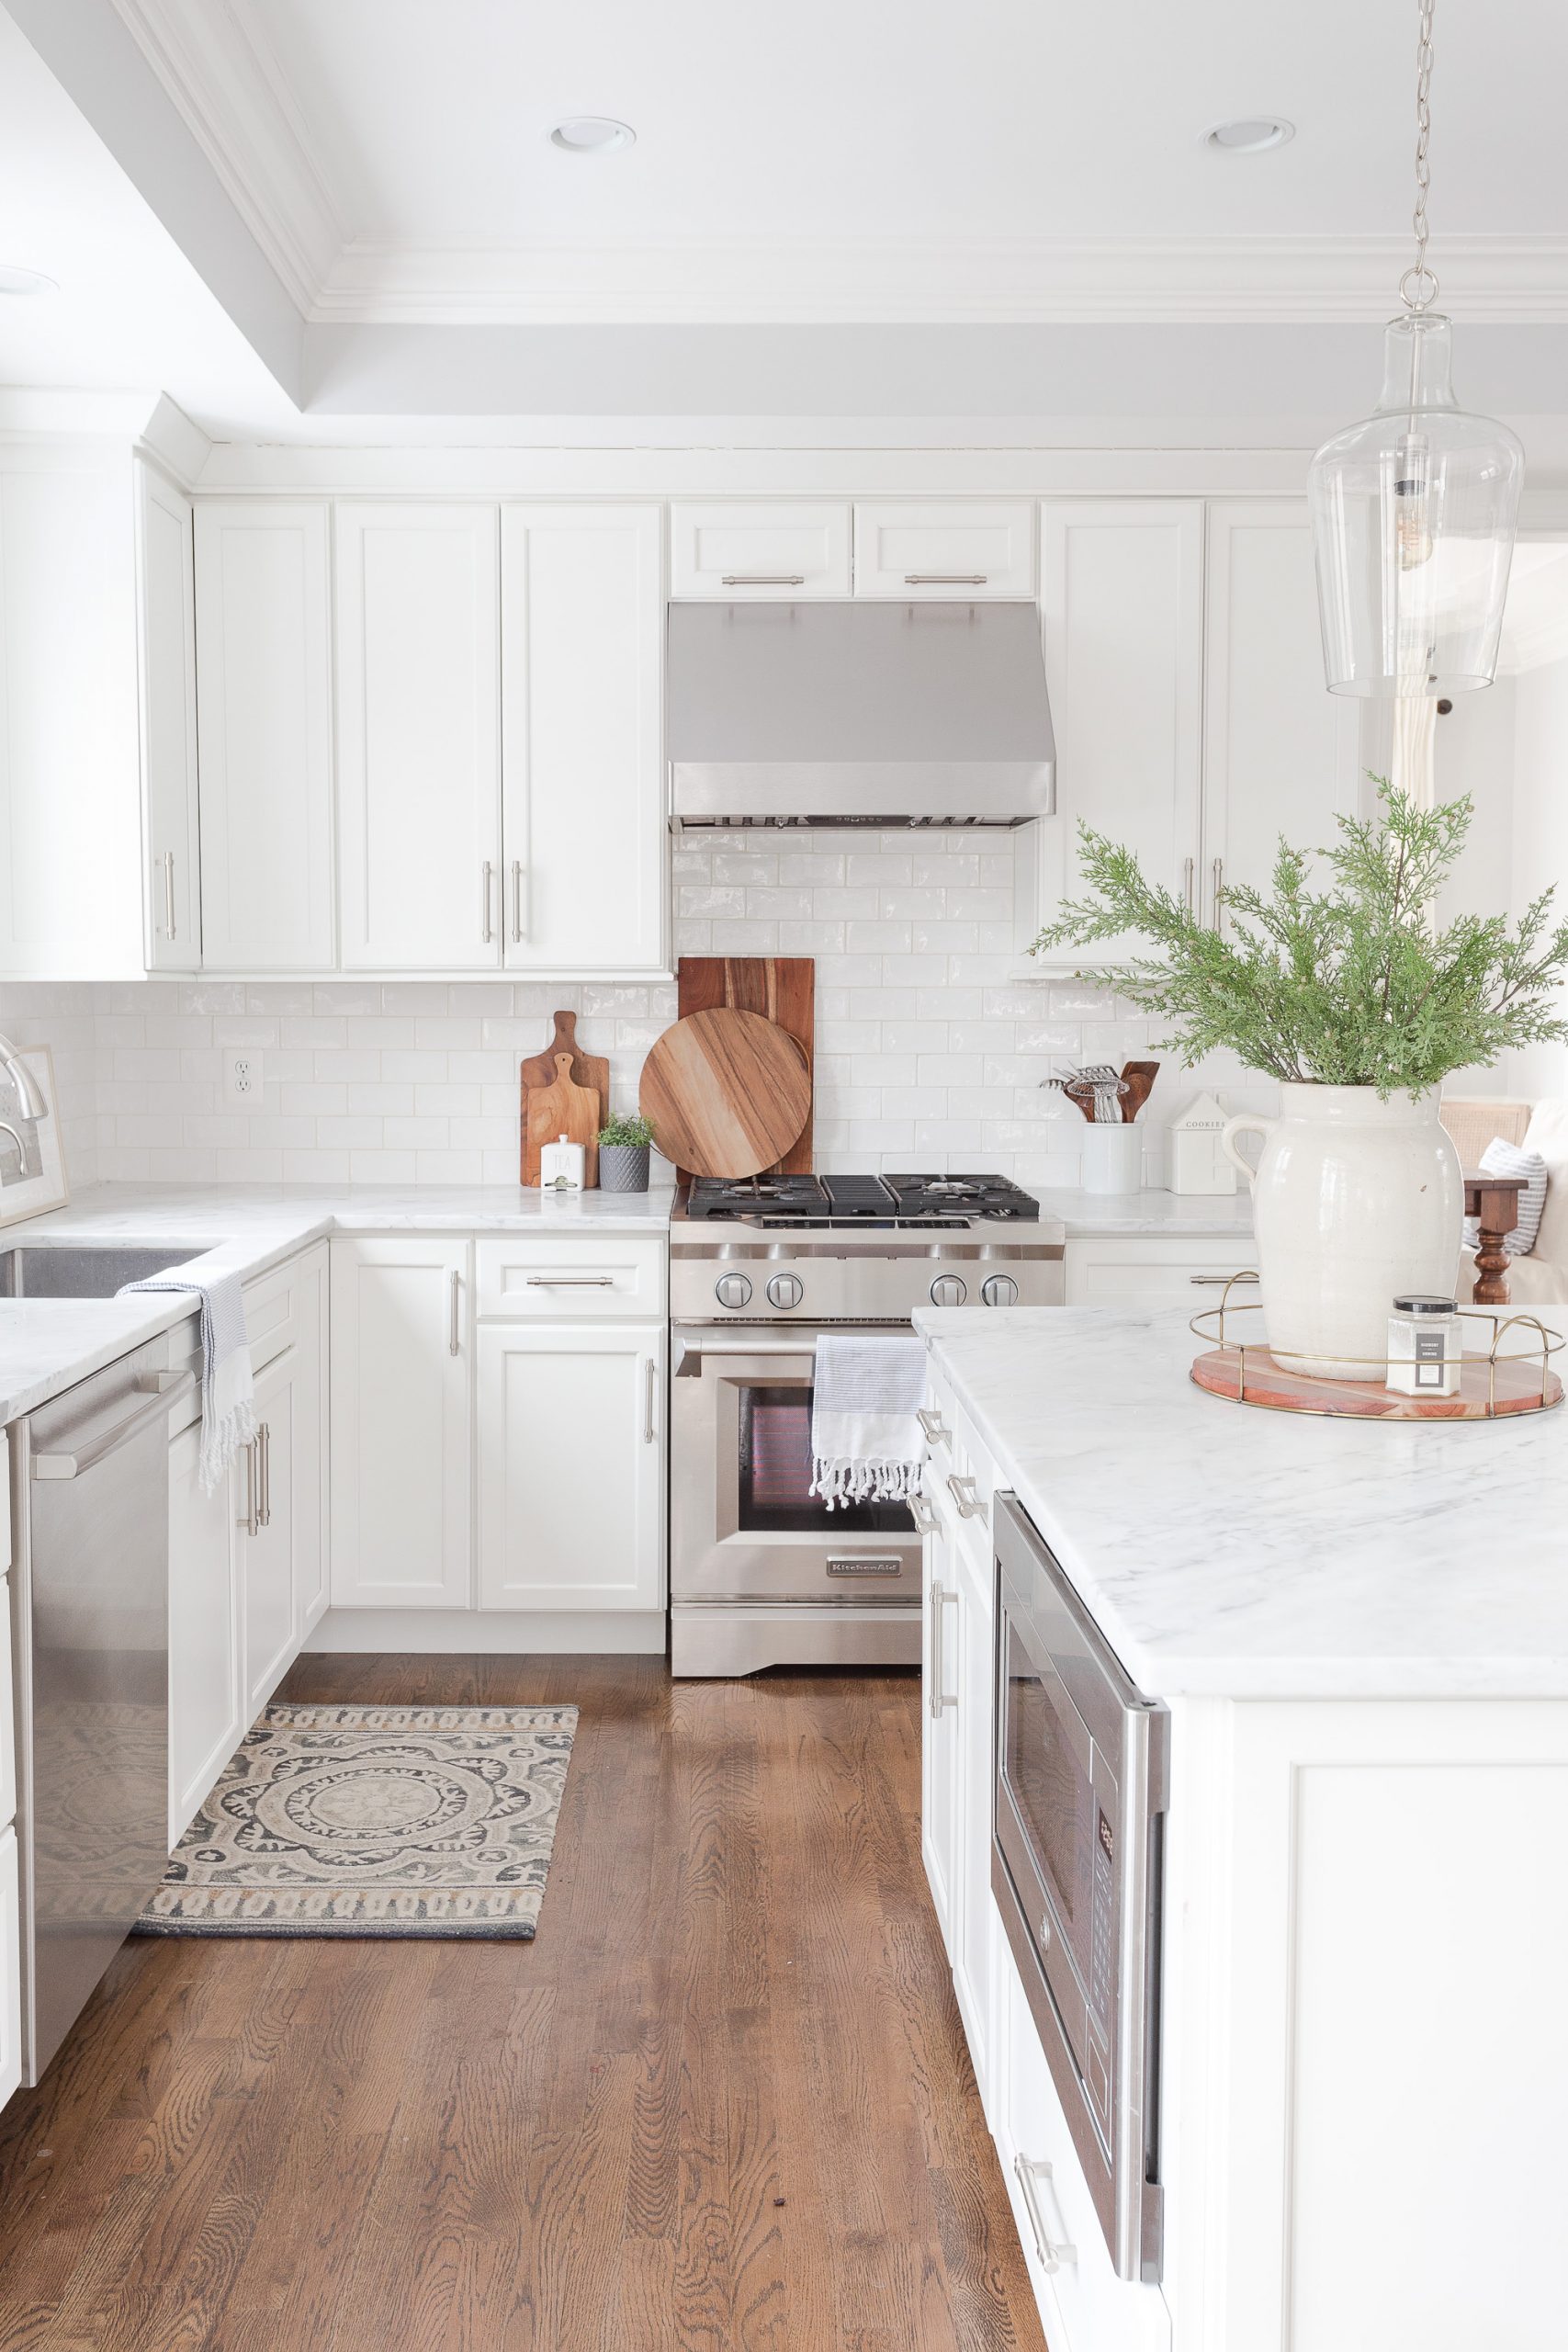 White kitchen with dark hardwood floors, marble countertops, white subway tile and stainless steel gas range.